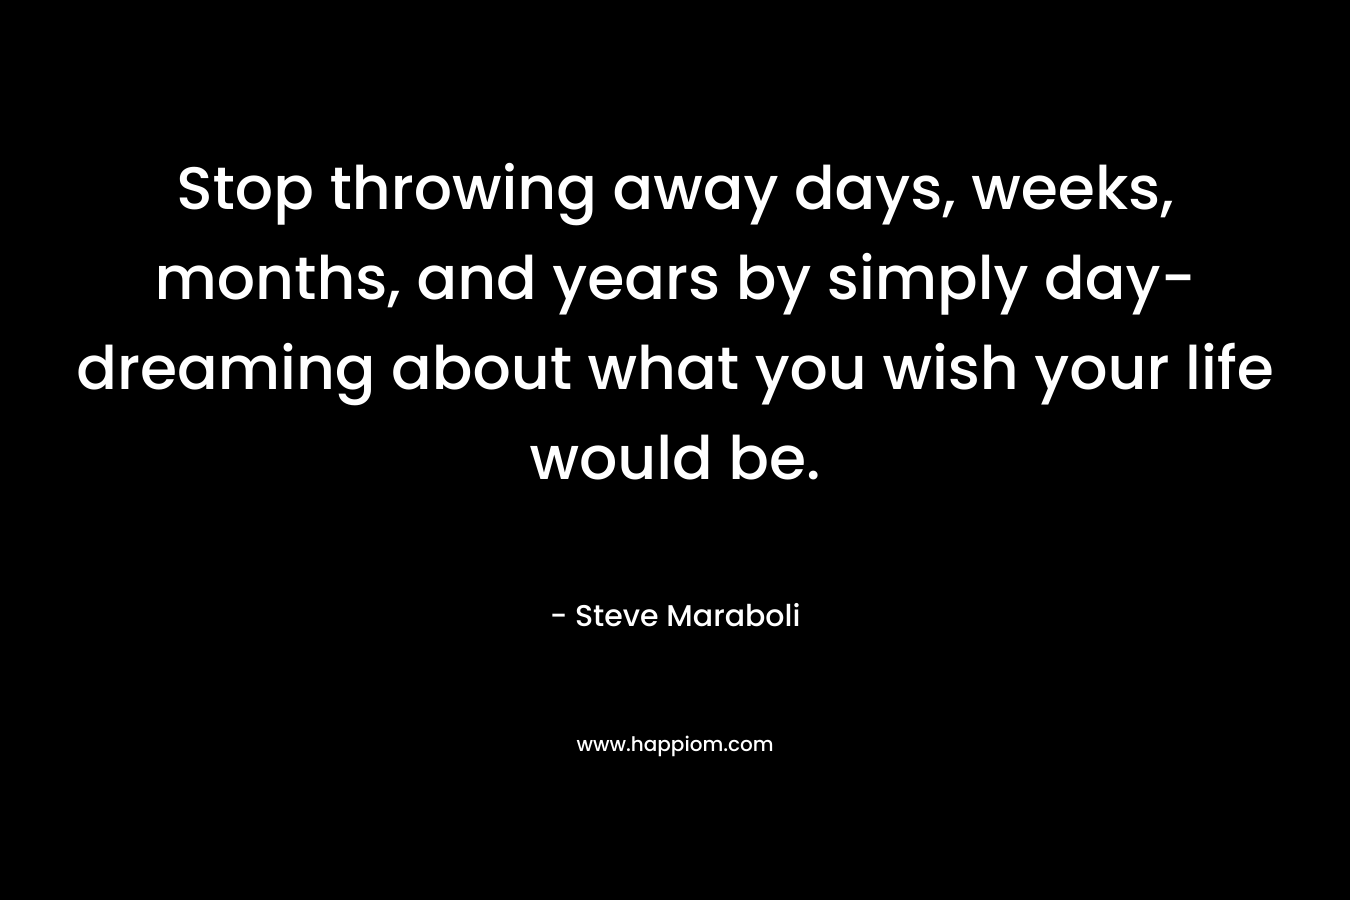 Stop throwing away days, weeks, months, and years by simply day-dreaming about what you wish your life would be. – Steve Maraboli